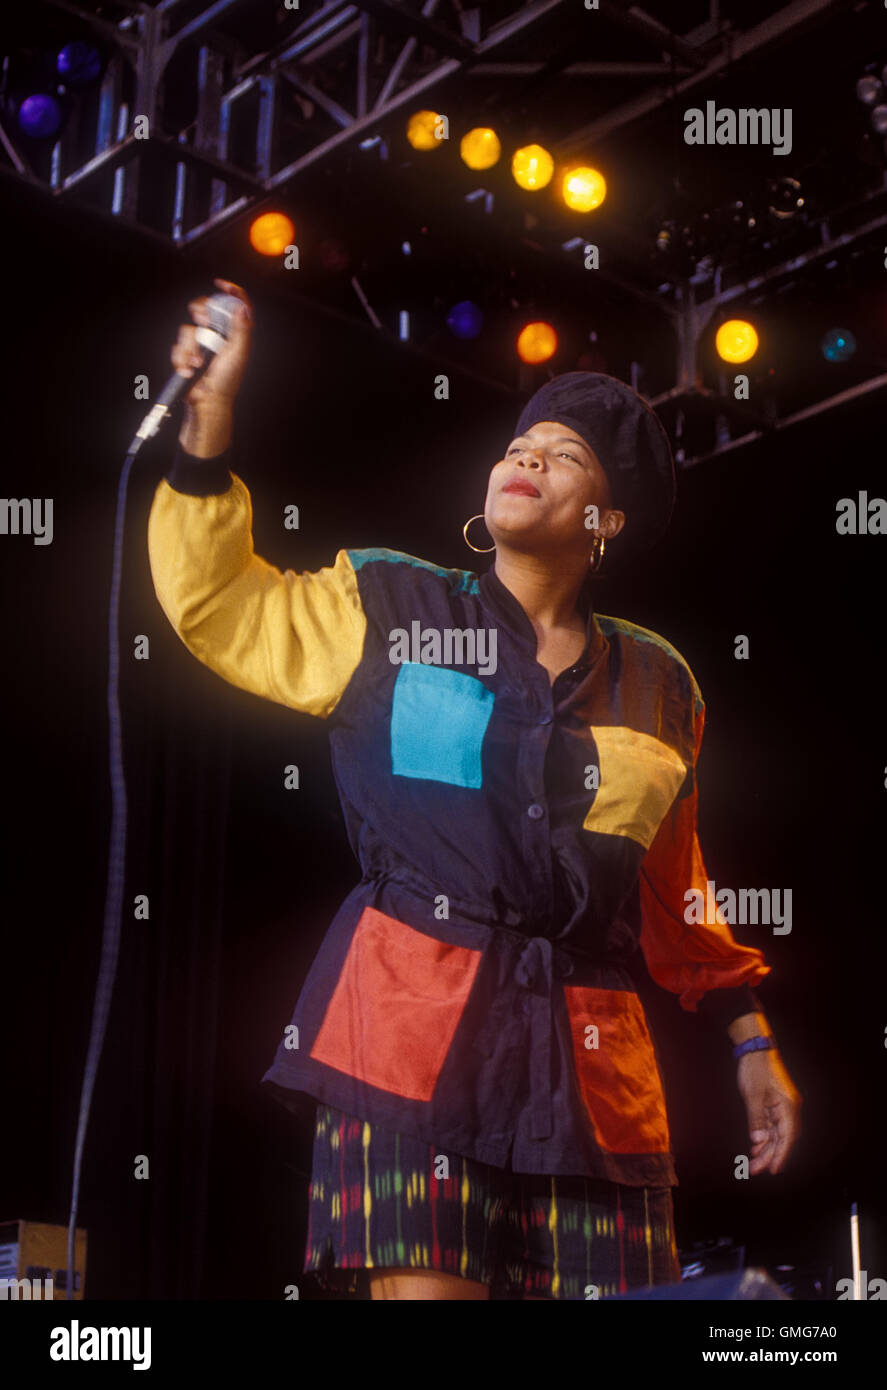 COSTA MESA, CA - OCTOBER 7, 1990 : Queen Latifah performing live at A Gathering Of The Tribes Music Festival on October 7, 1990 at the Pacific Amphitheatre in Costa Mesa, CA. Photo © Kevin Estrada / MediaPunch Stock Photo